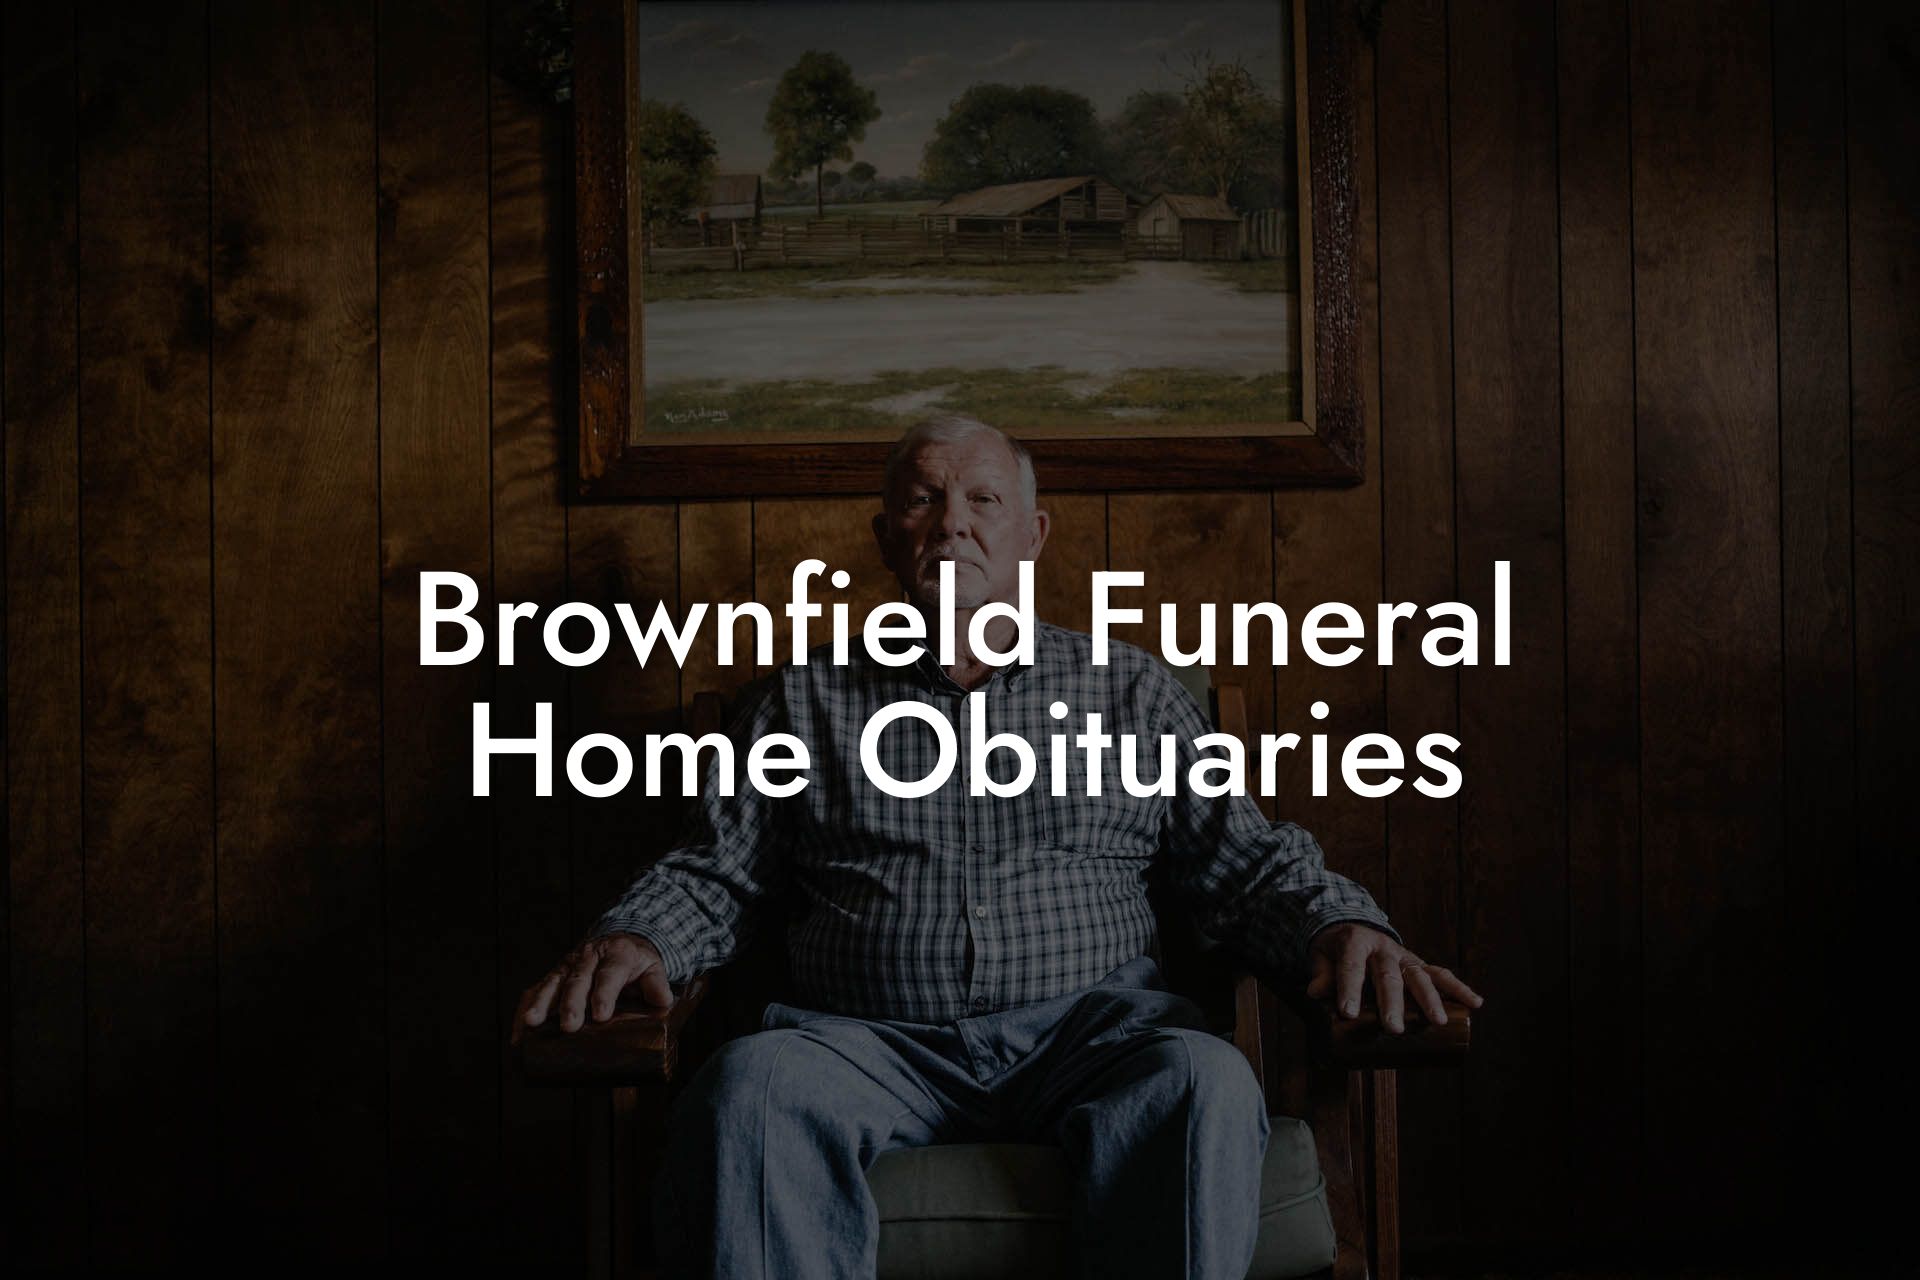 Brownfield Funeral Home Obituaries